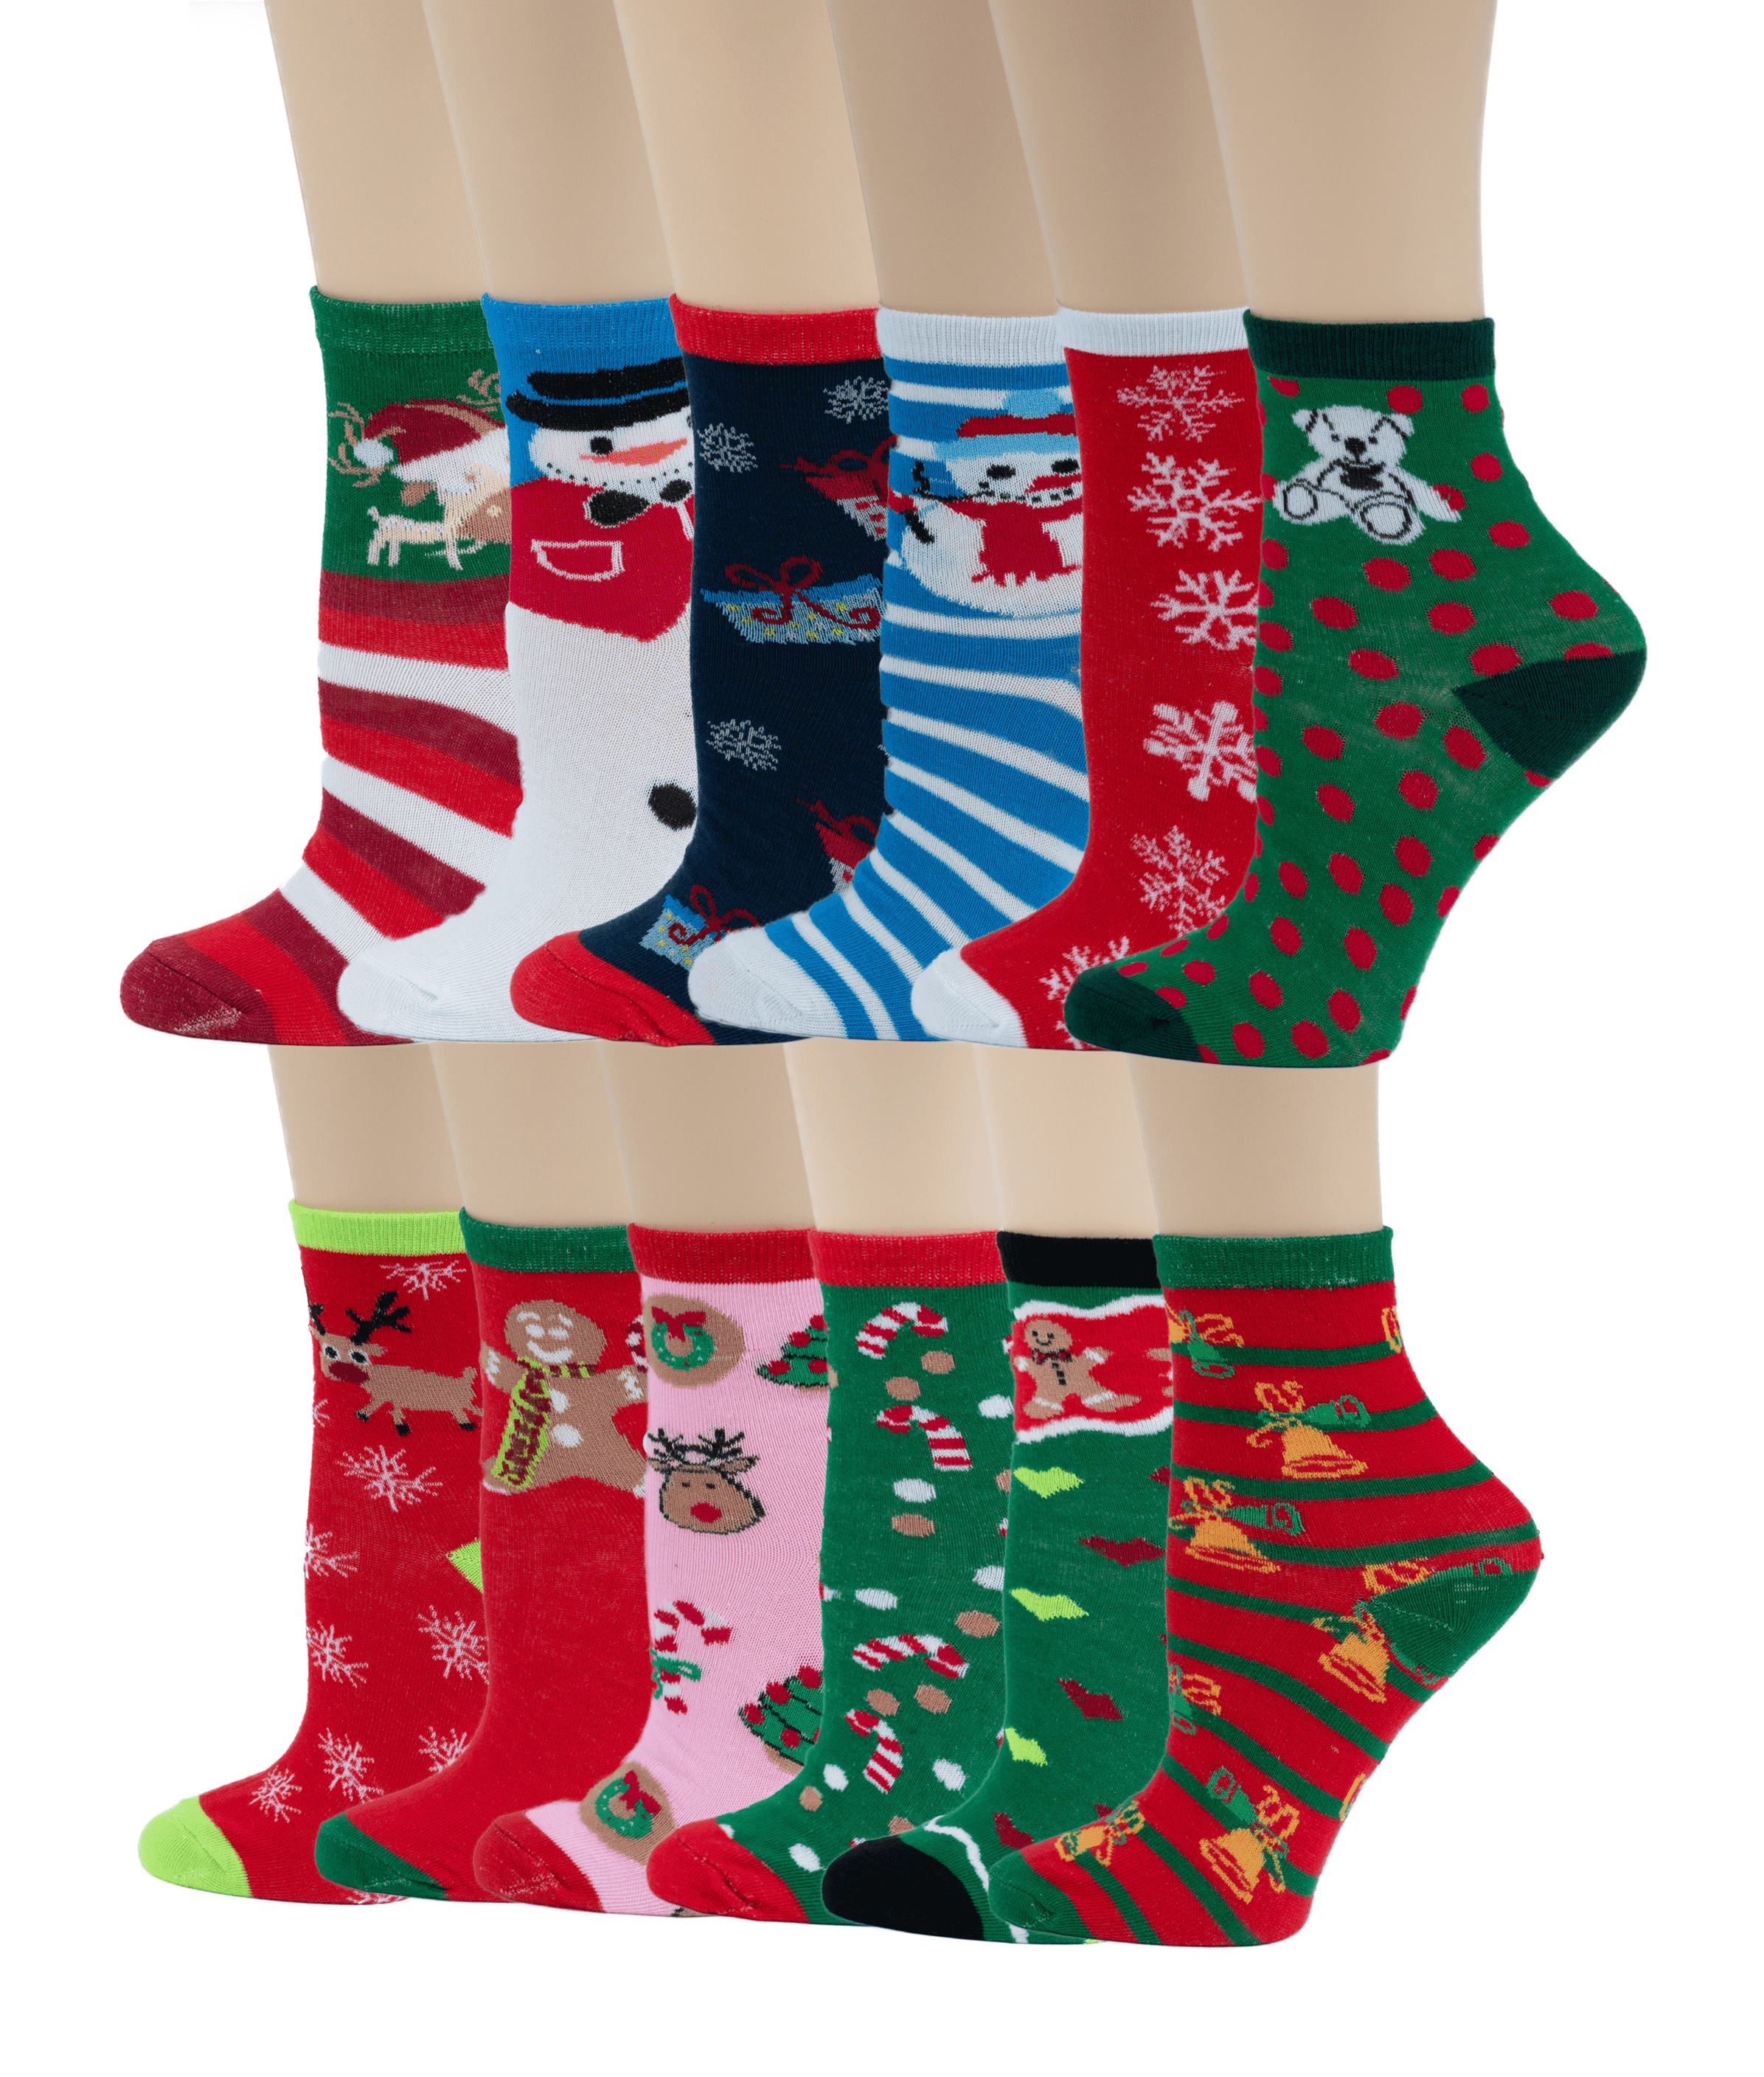 Womens Mens Girls Boys Xmas Socks Assorted Designs Available In Many Sizes Lot 